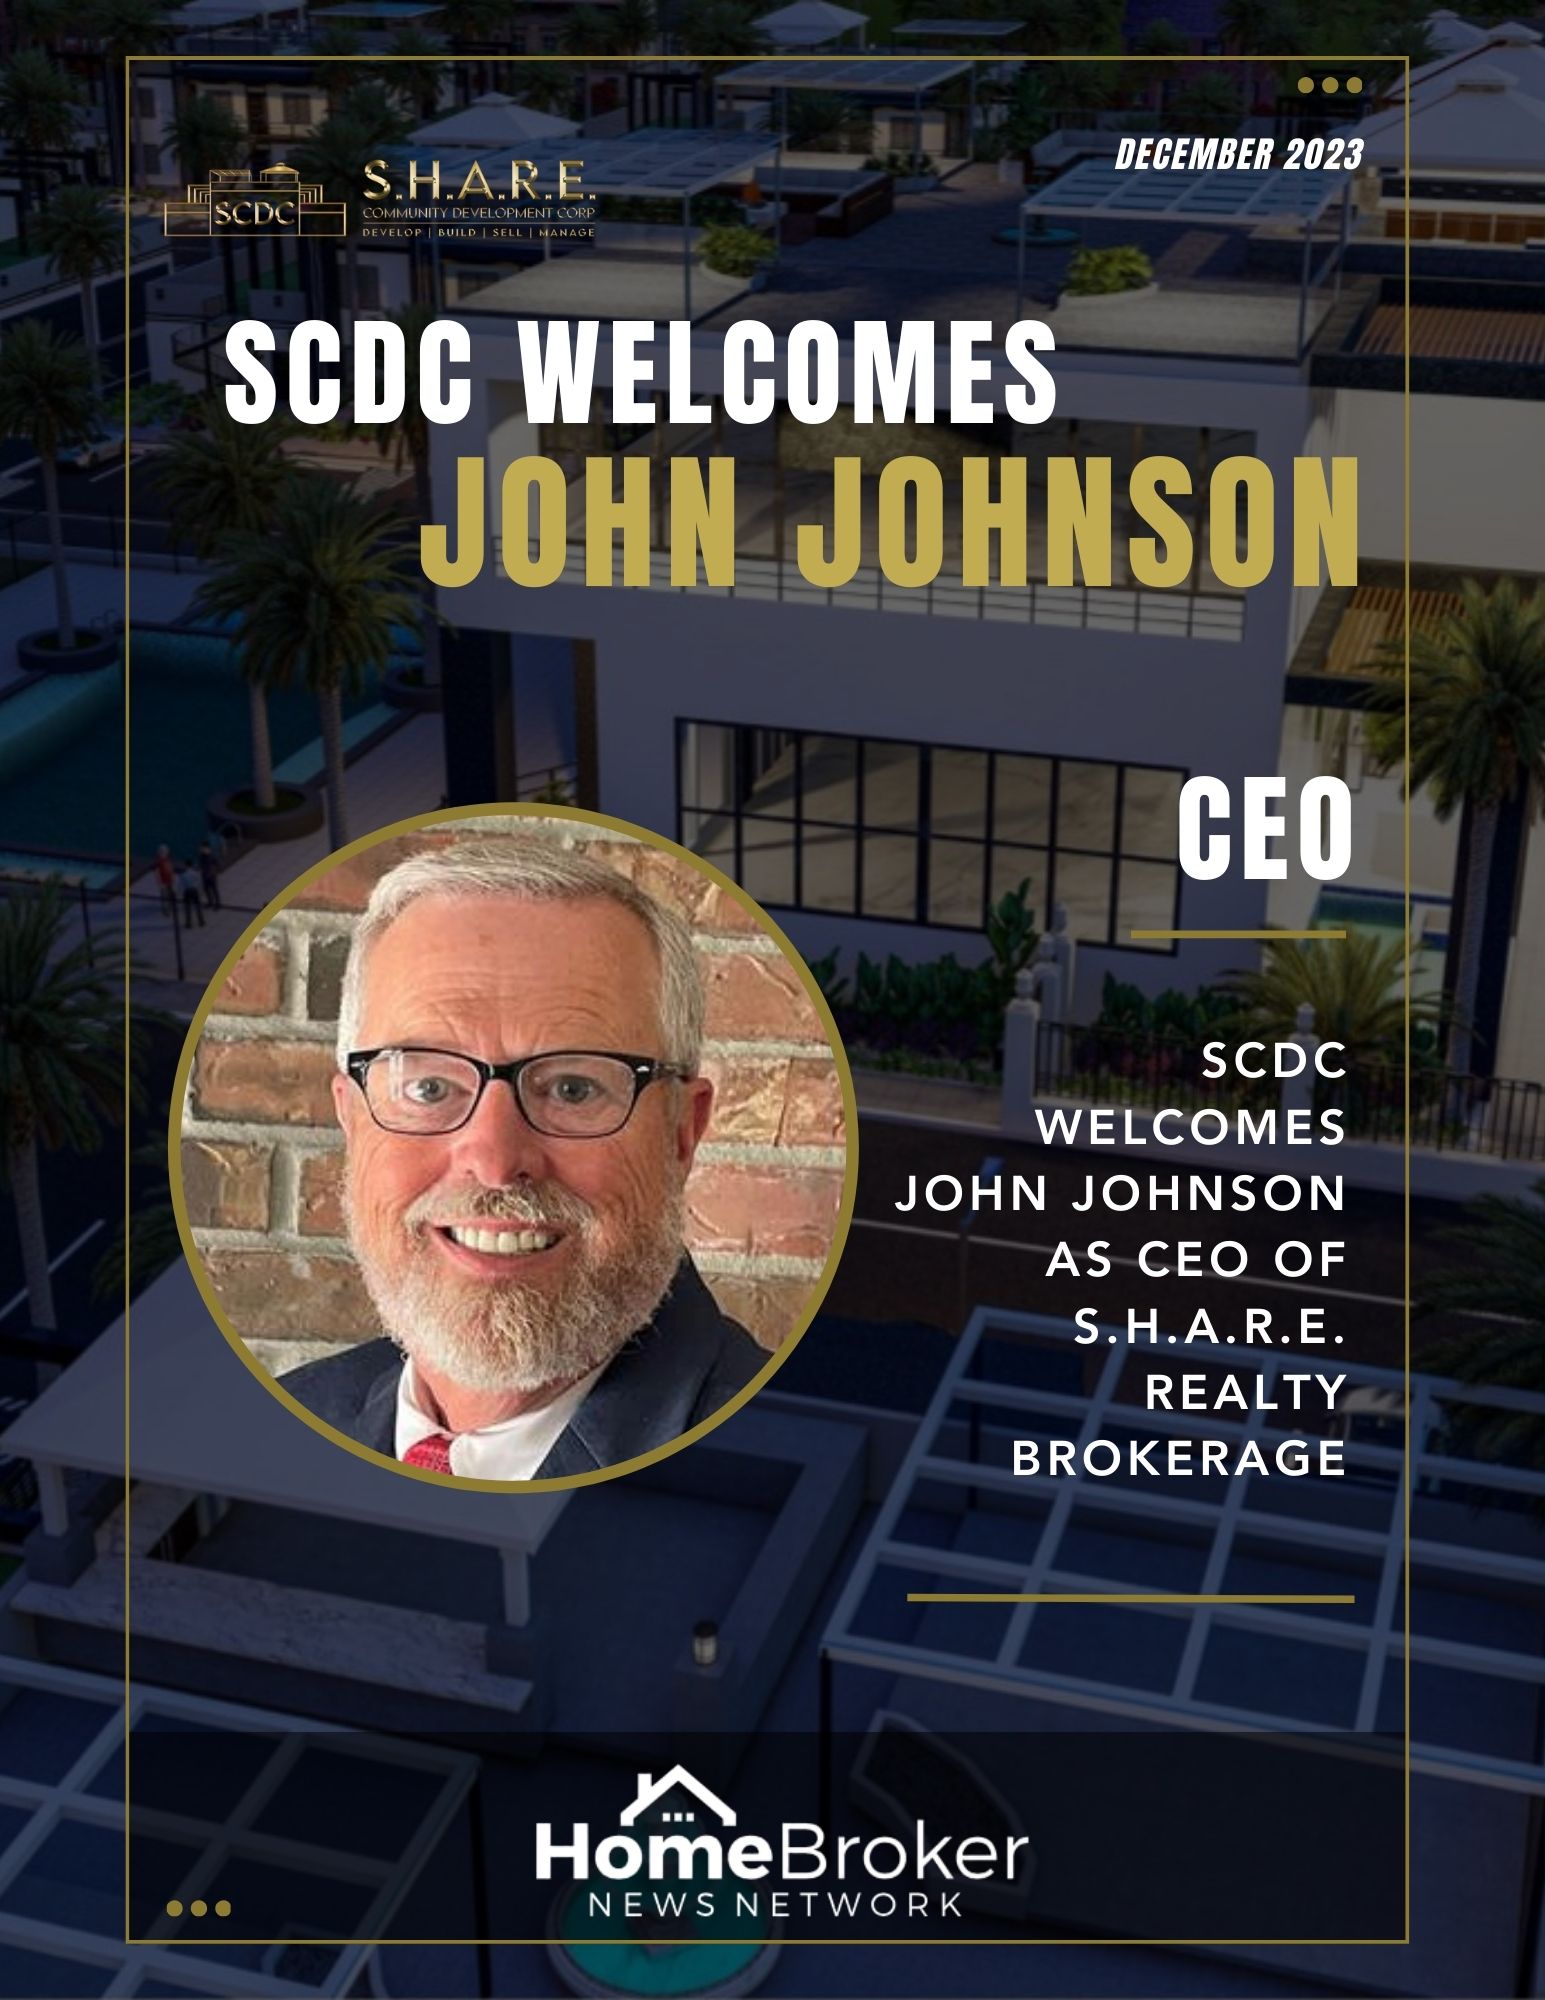 John Johnson Embraces CEO Role at S.H.A.R.E. Realty Brokerage, A Subsidiary of SCDC, Pioneering A Visionary Path